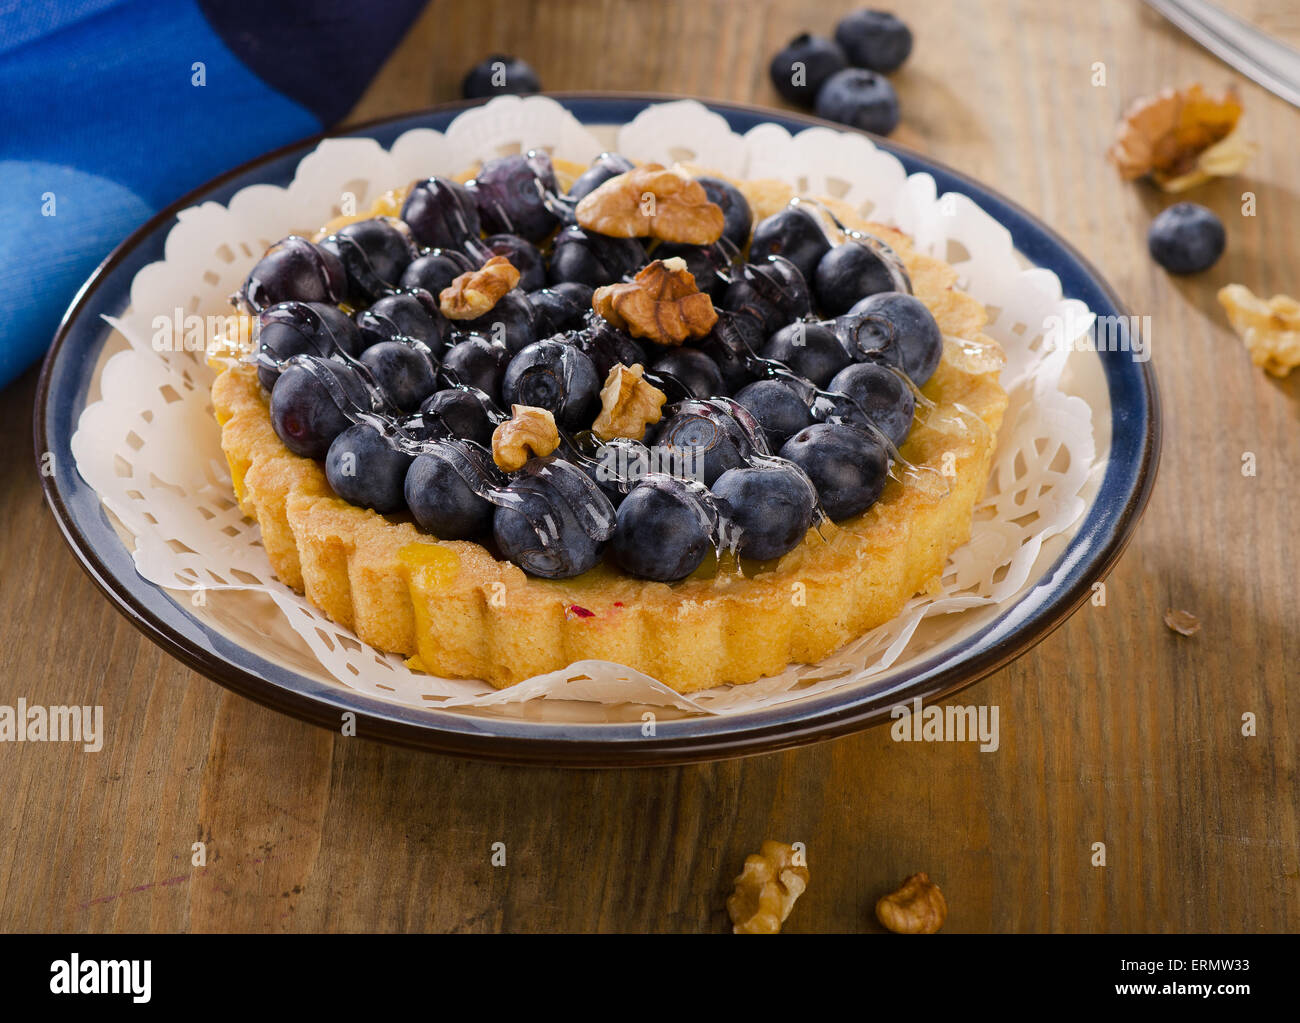 Tasty tart with blueberries  on a wooden table. Stock Photo